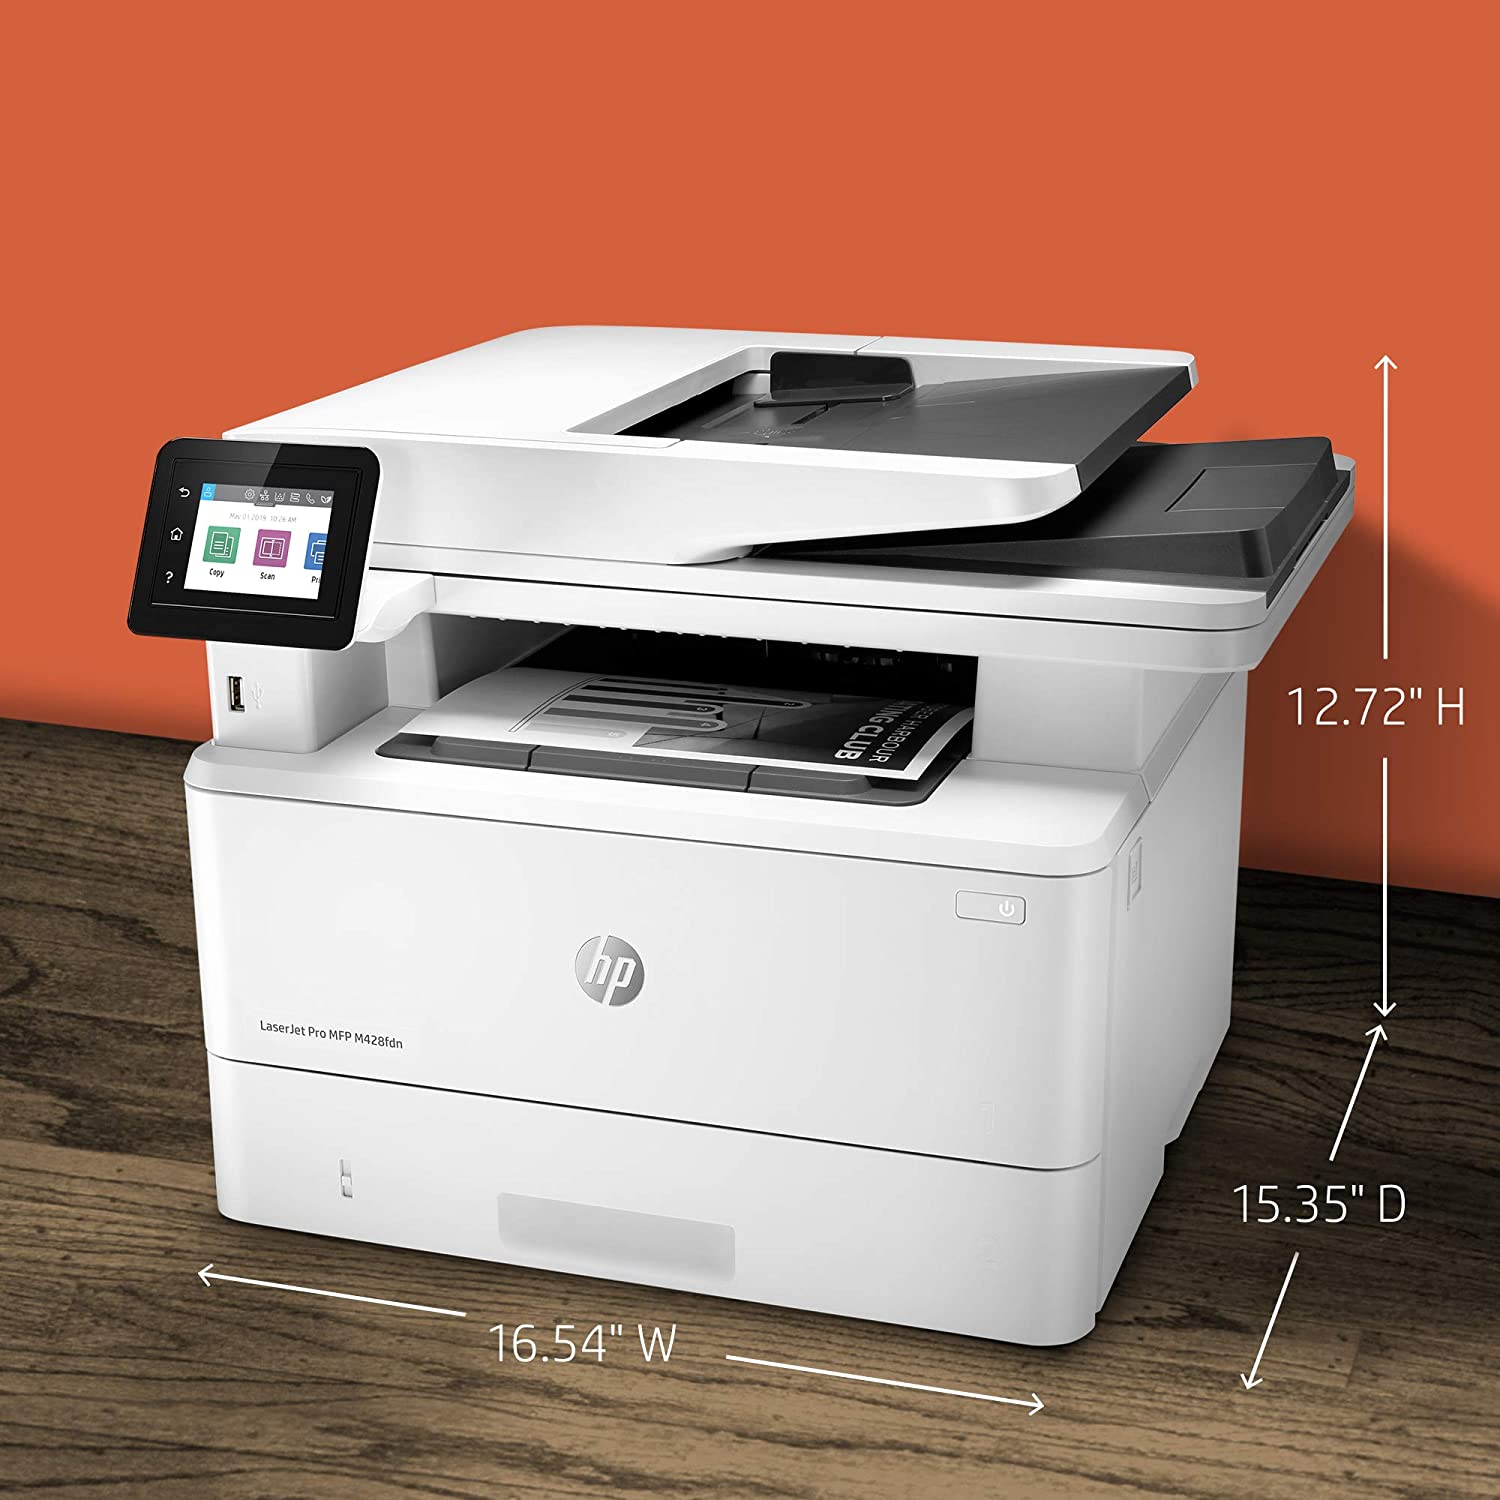 HP W1A29A#BGJ Laserjet Pro M428fdn Network Monochrome Laser all-in-one Printer: Copy, Scan, Fax, Printing - image 5 of 6